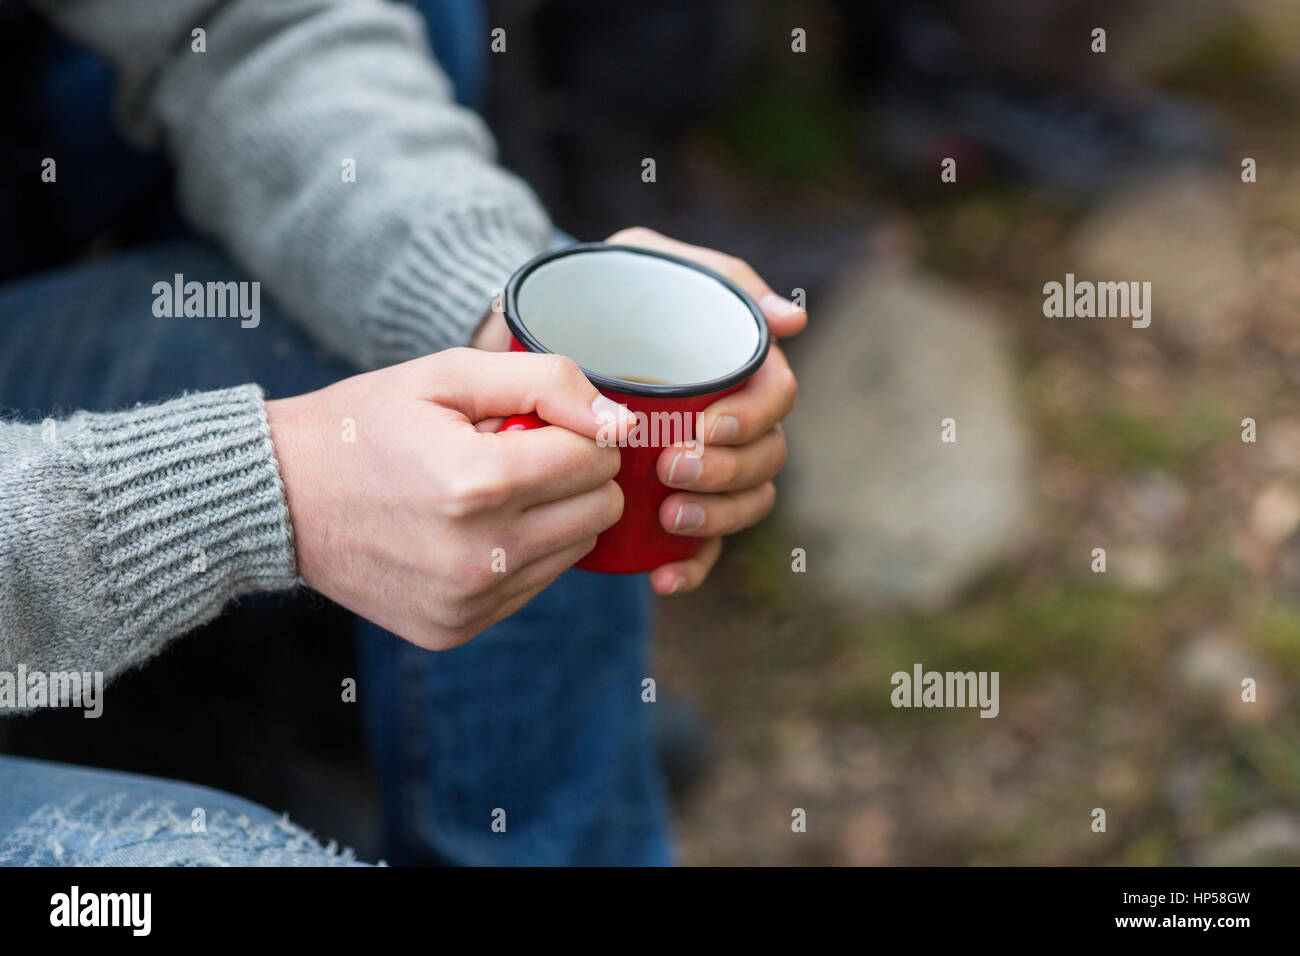 Man holding Coffee cup at campsite Banque D'Images